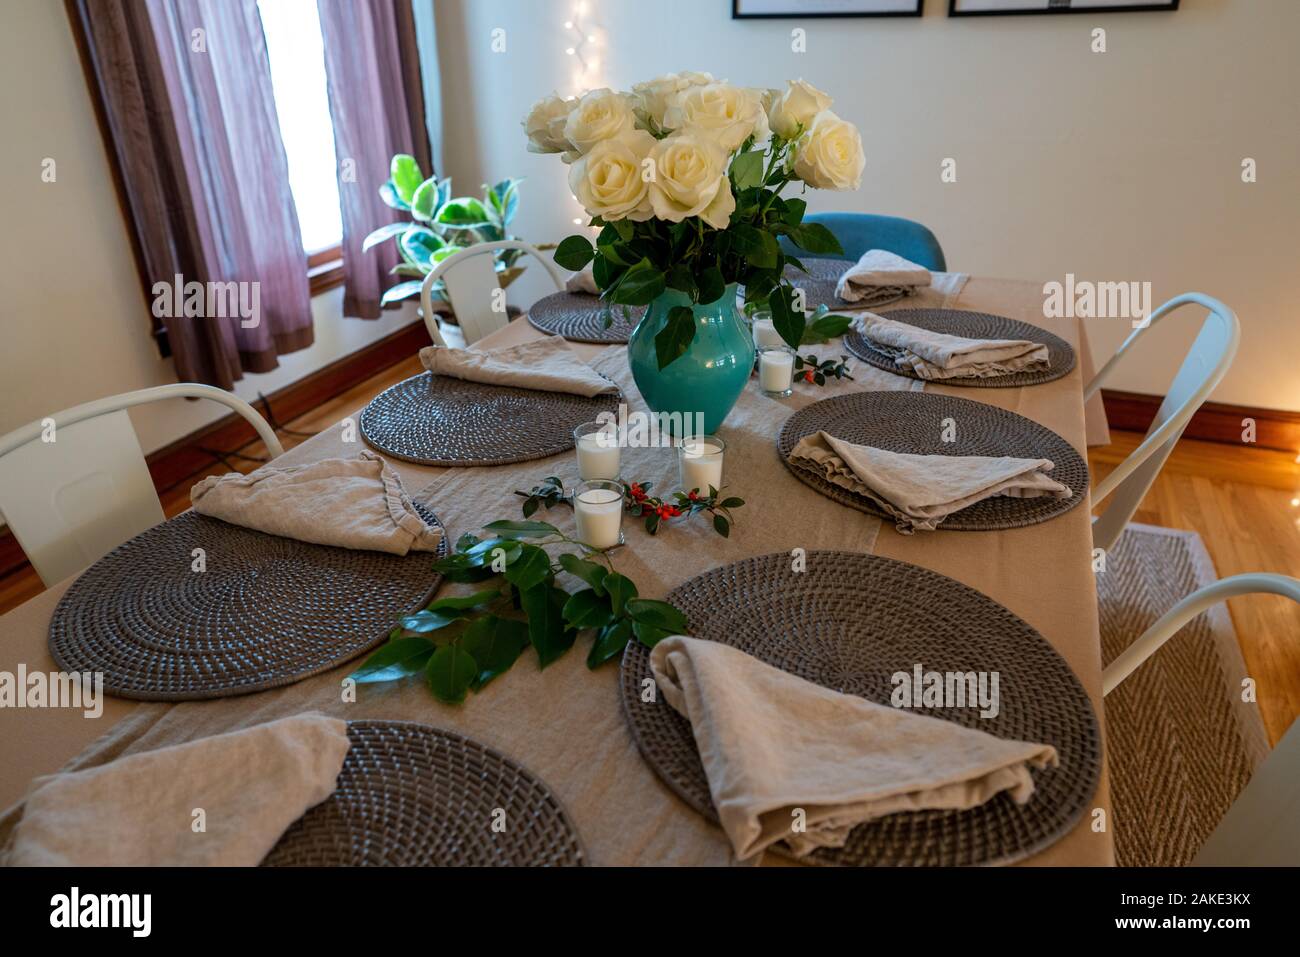 Dinner table prepared at a home with flowers and simple setting Stock Photo